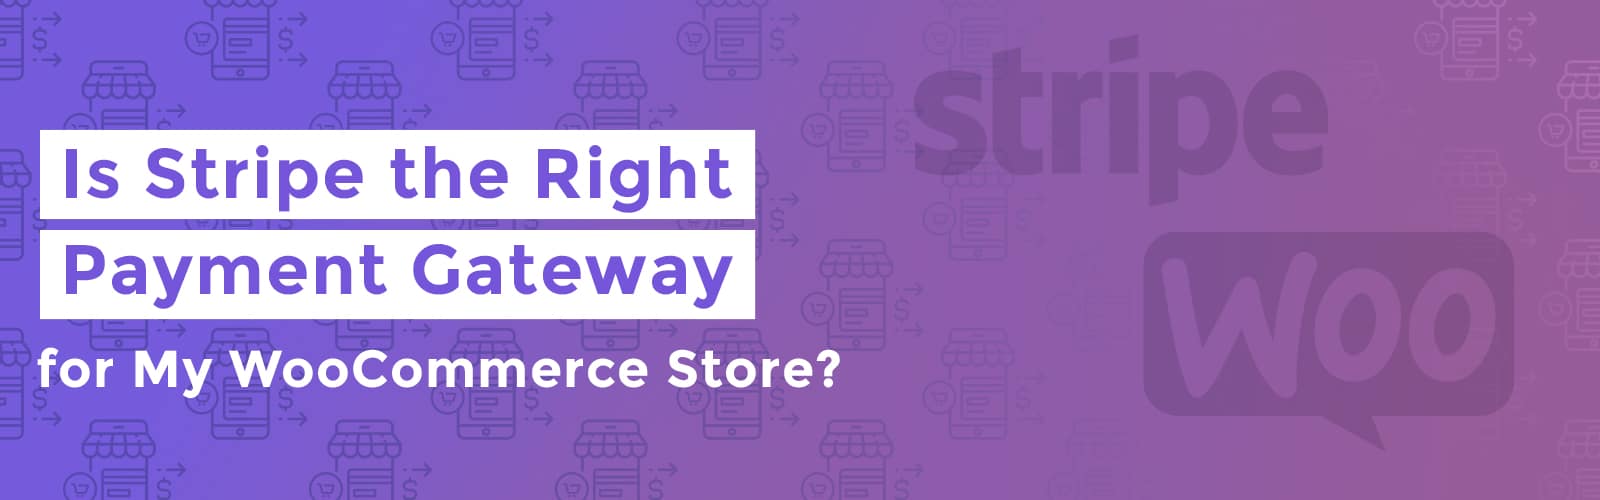 Is Stripe the right payment gateway for my WooCommerce store?